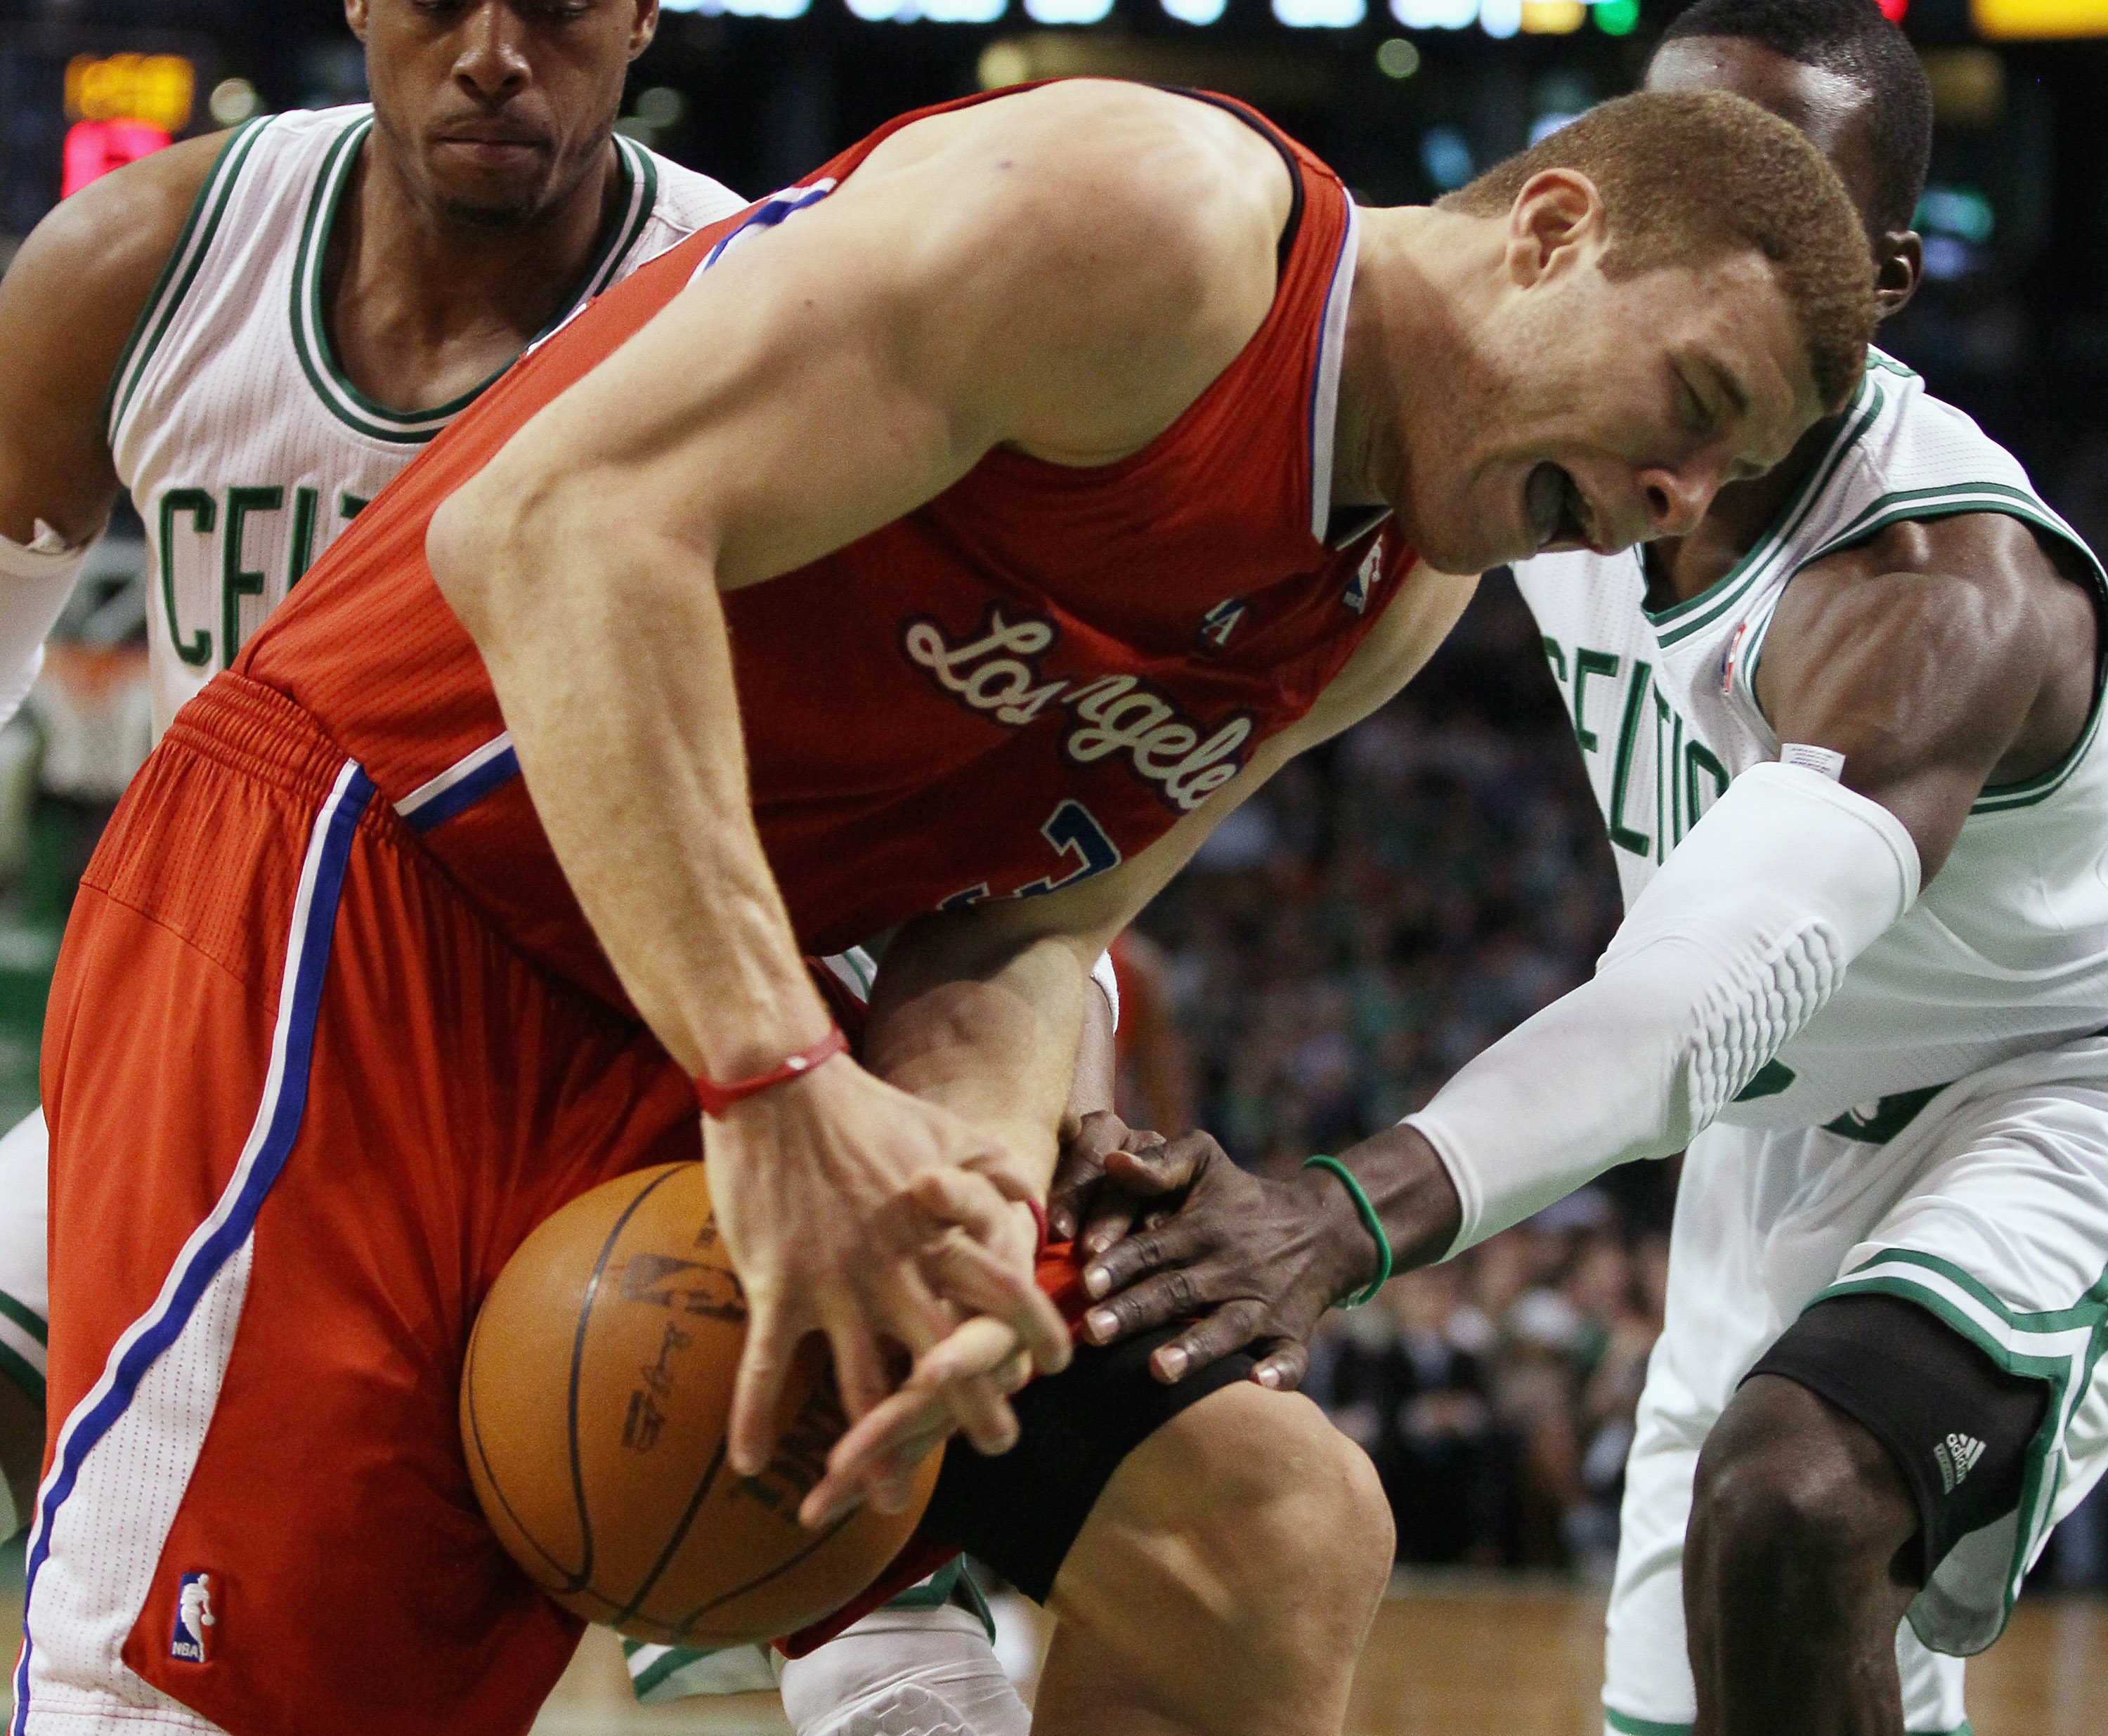 BOSTON, MA - MARCH 09:  Blake Griffin #32 of the Los Angeles Clippers tries to hang on to the ball as Rajon Rondo #9 of the Boston Celtics defends on March 9, 2011 at the TD Garden in Boston, Massachusetts. The Los Angeles Clippers defeated the Boston Cel